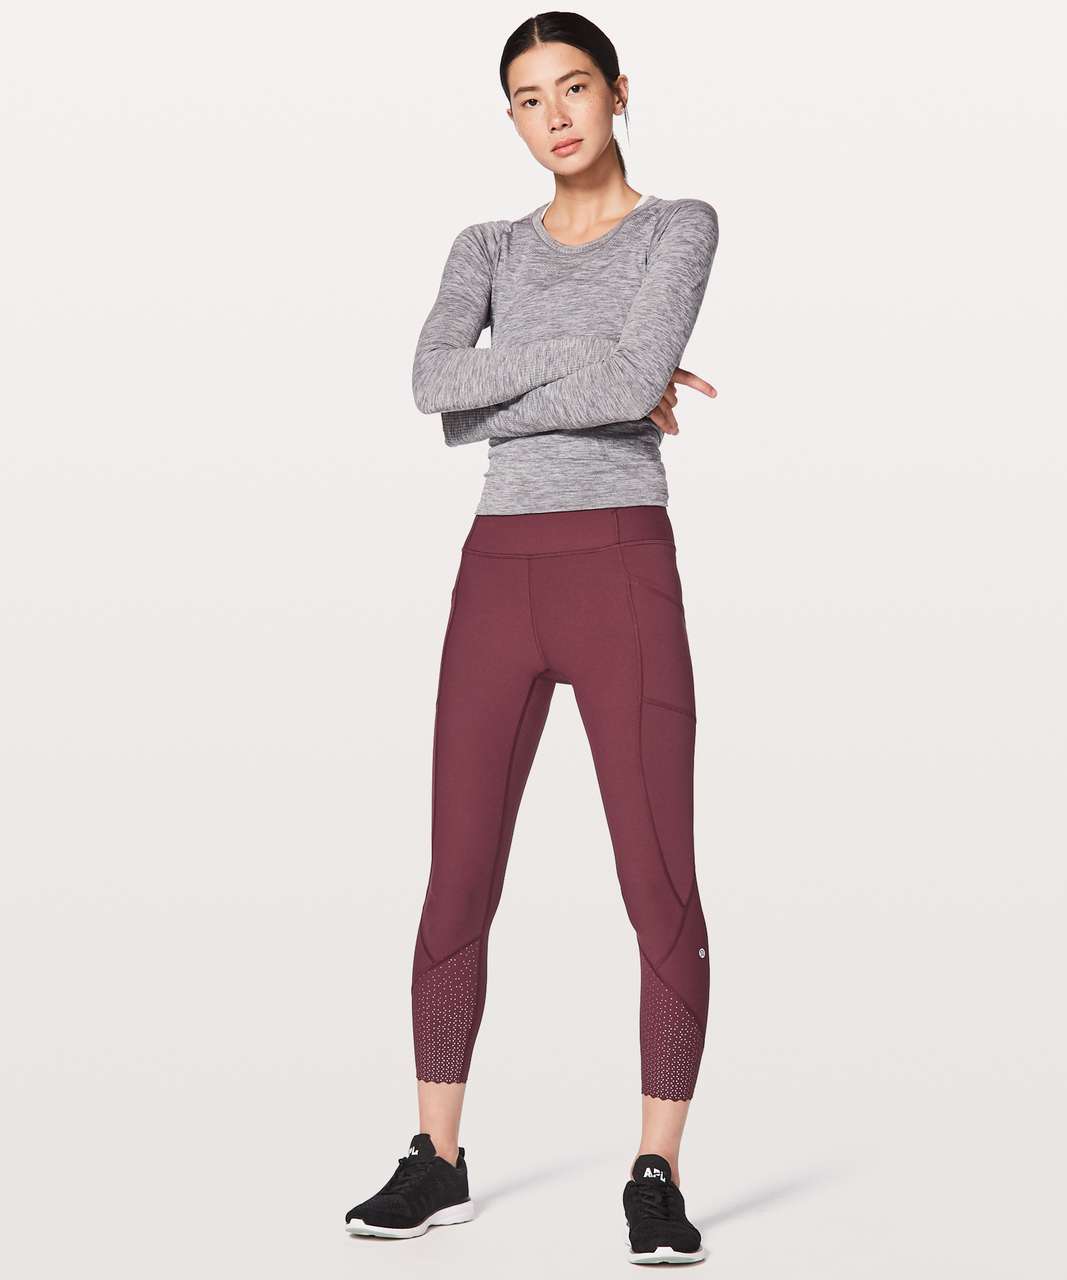 Lululemon Tight Stuff Tight in Wine Berry  - My Superficial Endeavors